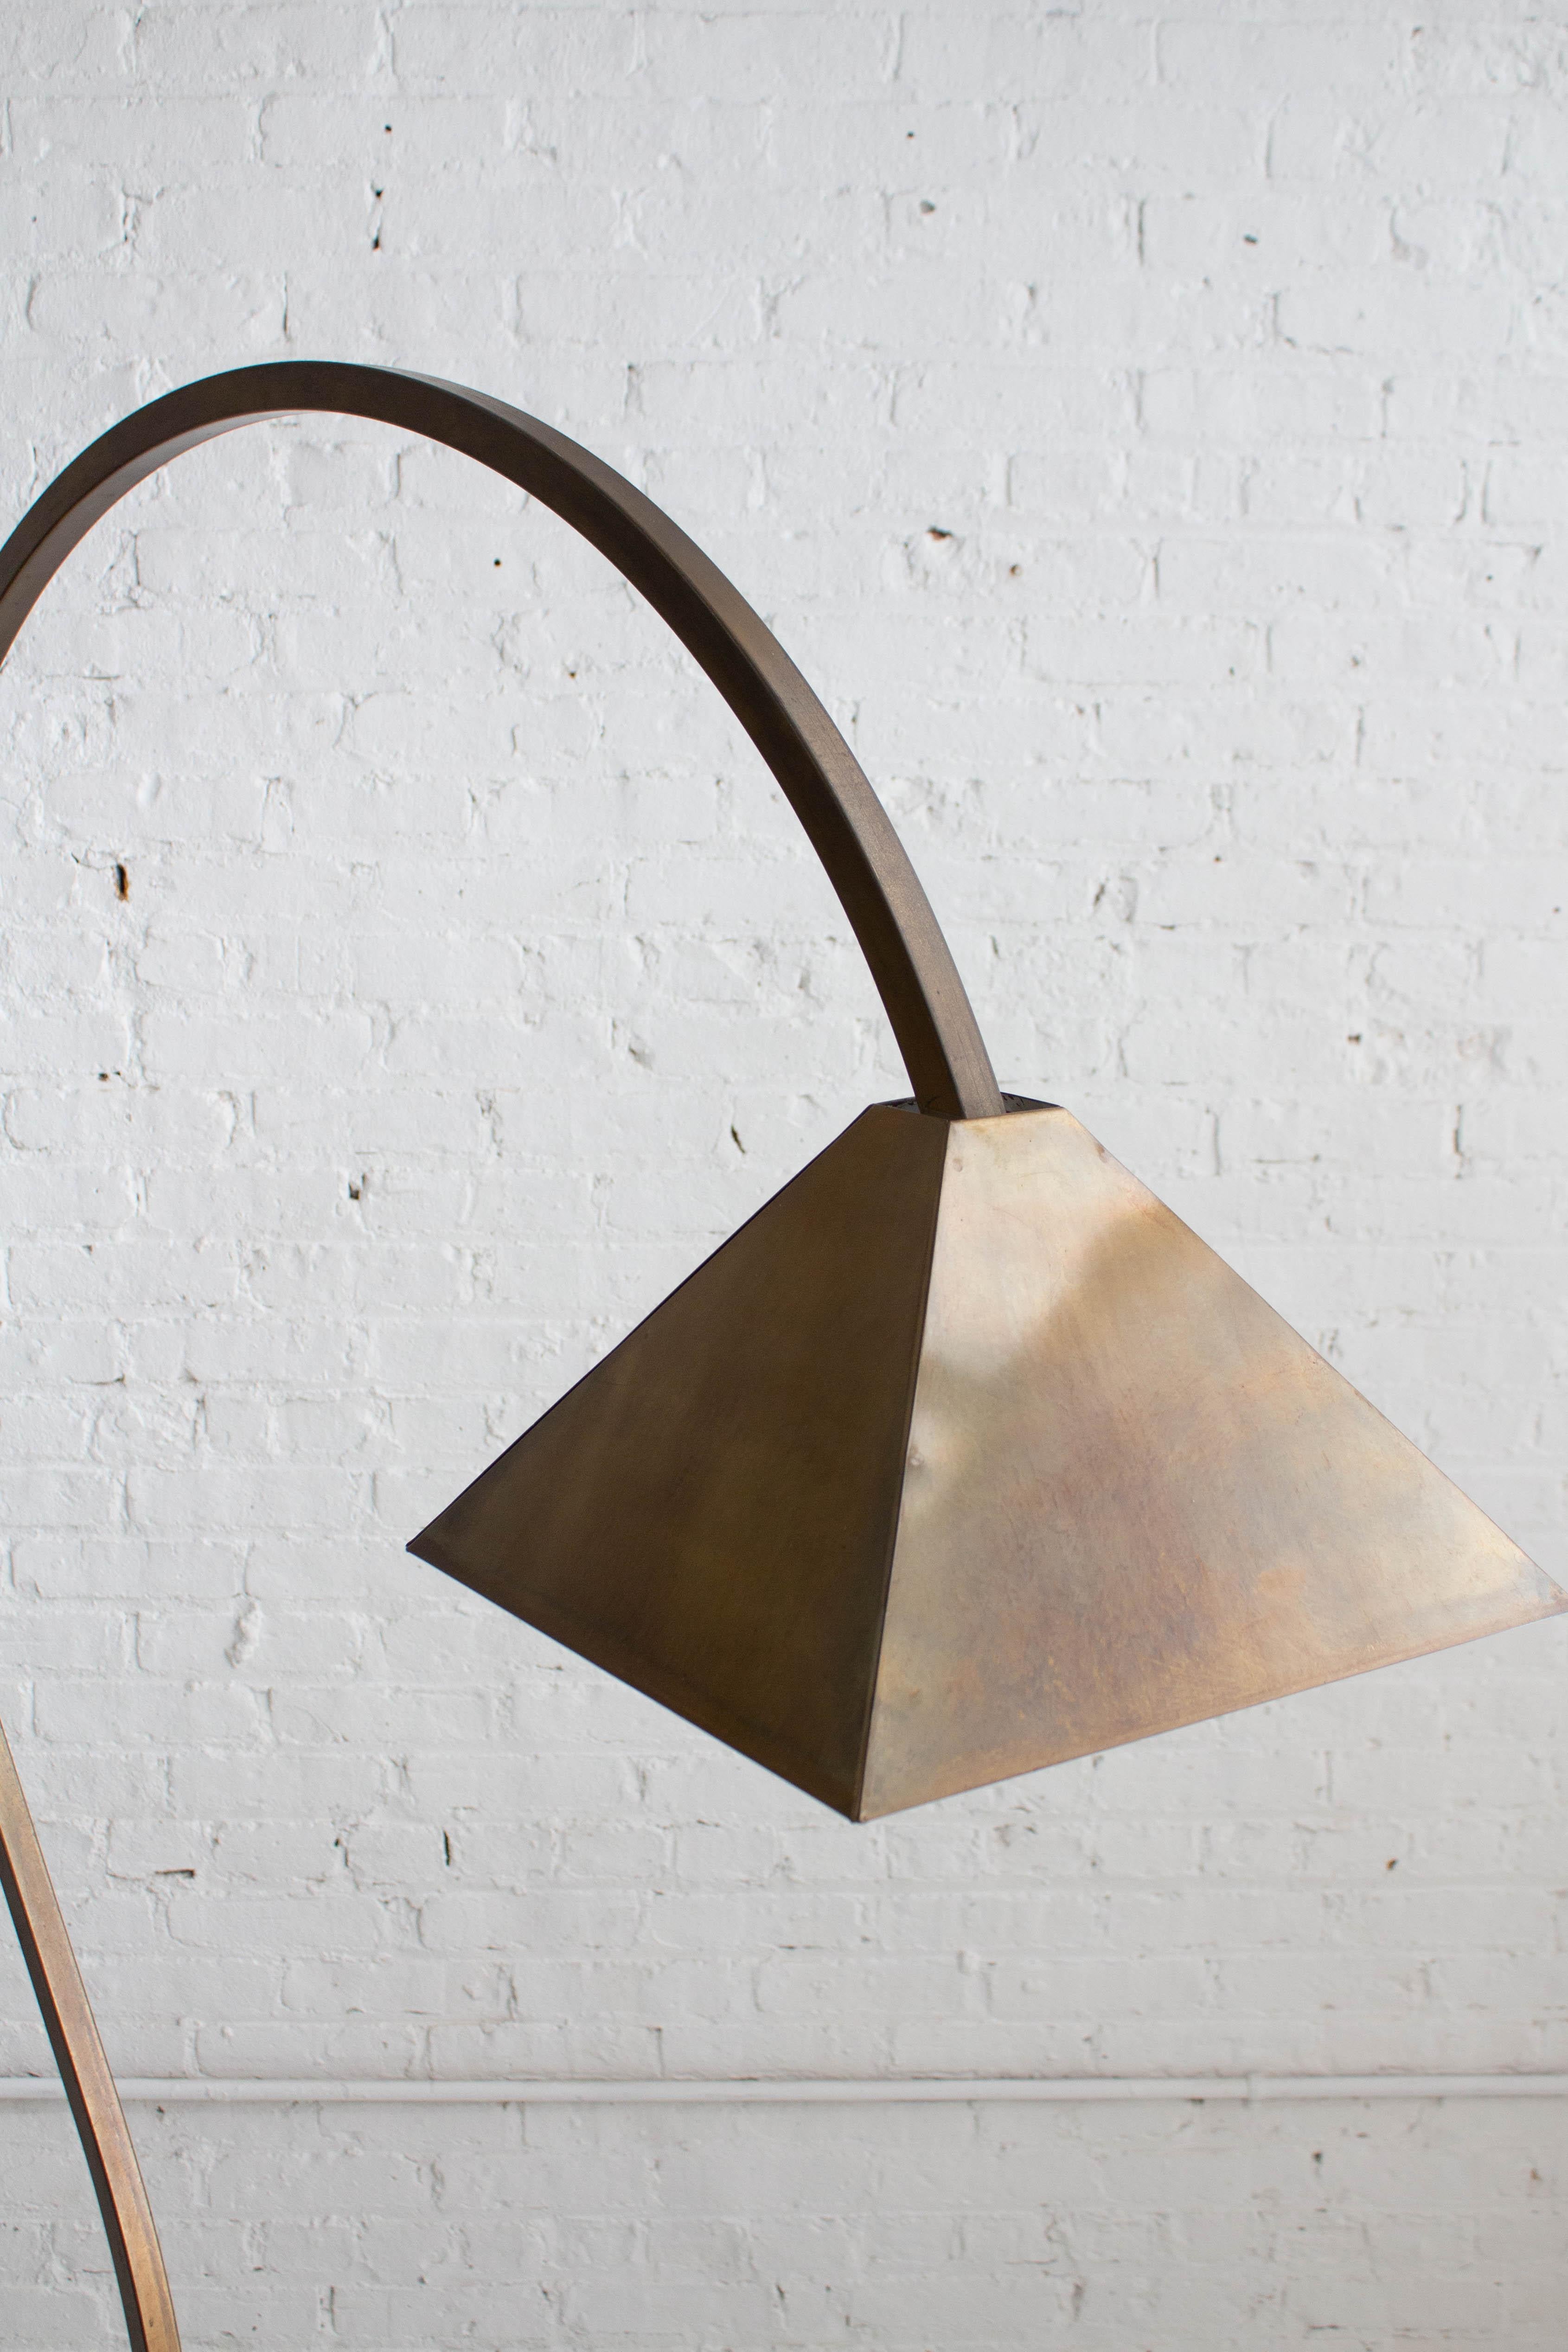 20th Century Studio Made Burnished Brass Arc Floor Lamp For Sale